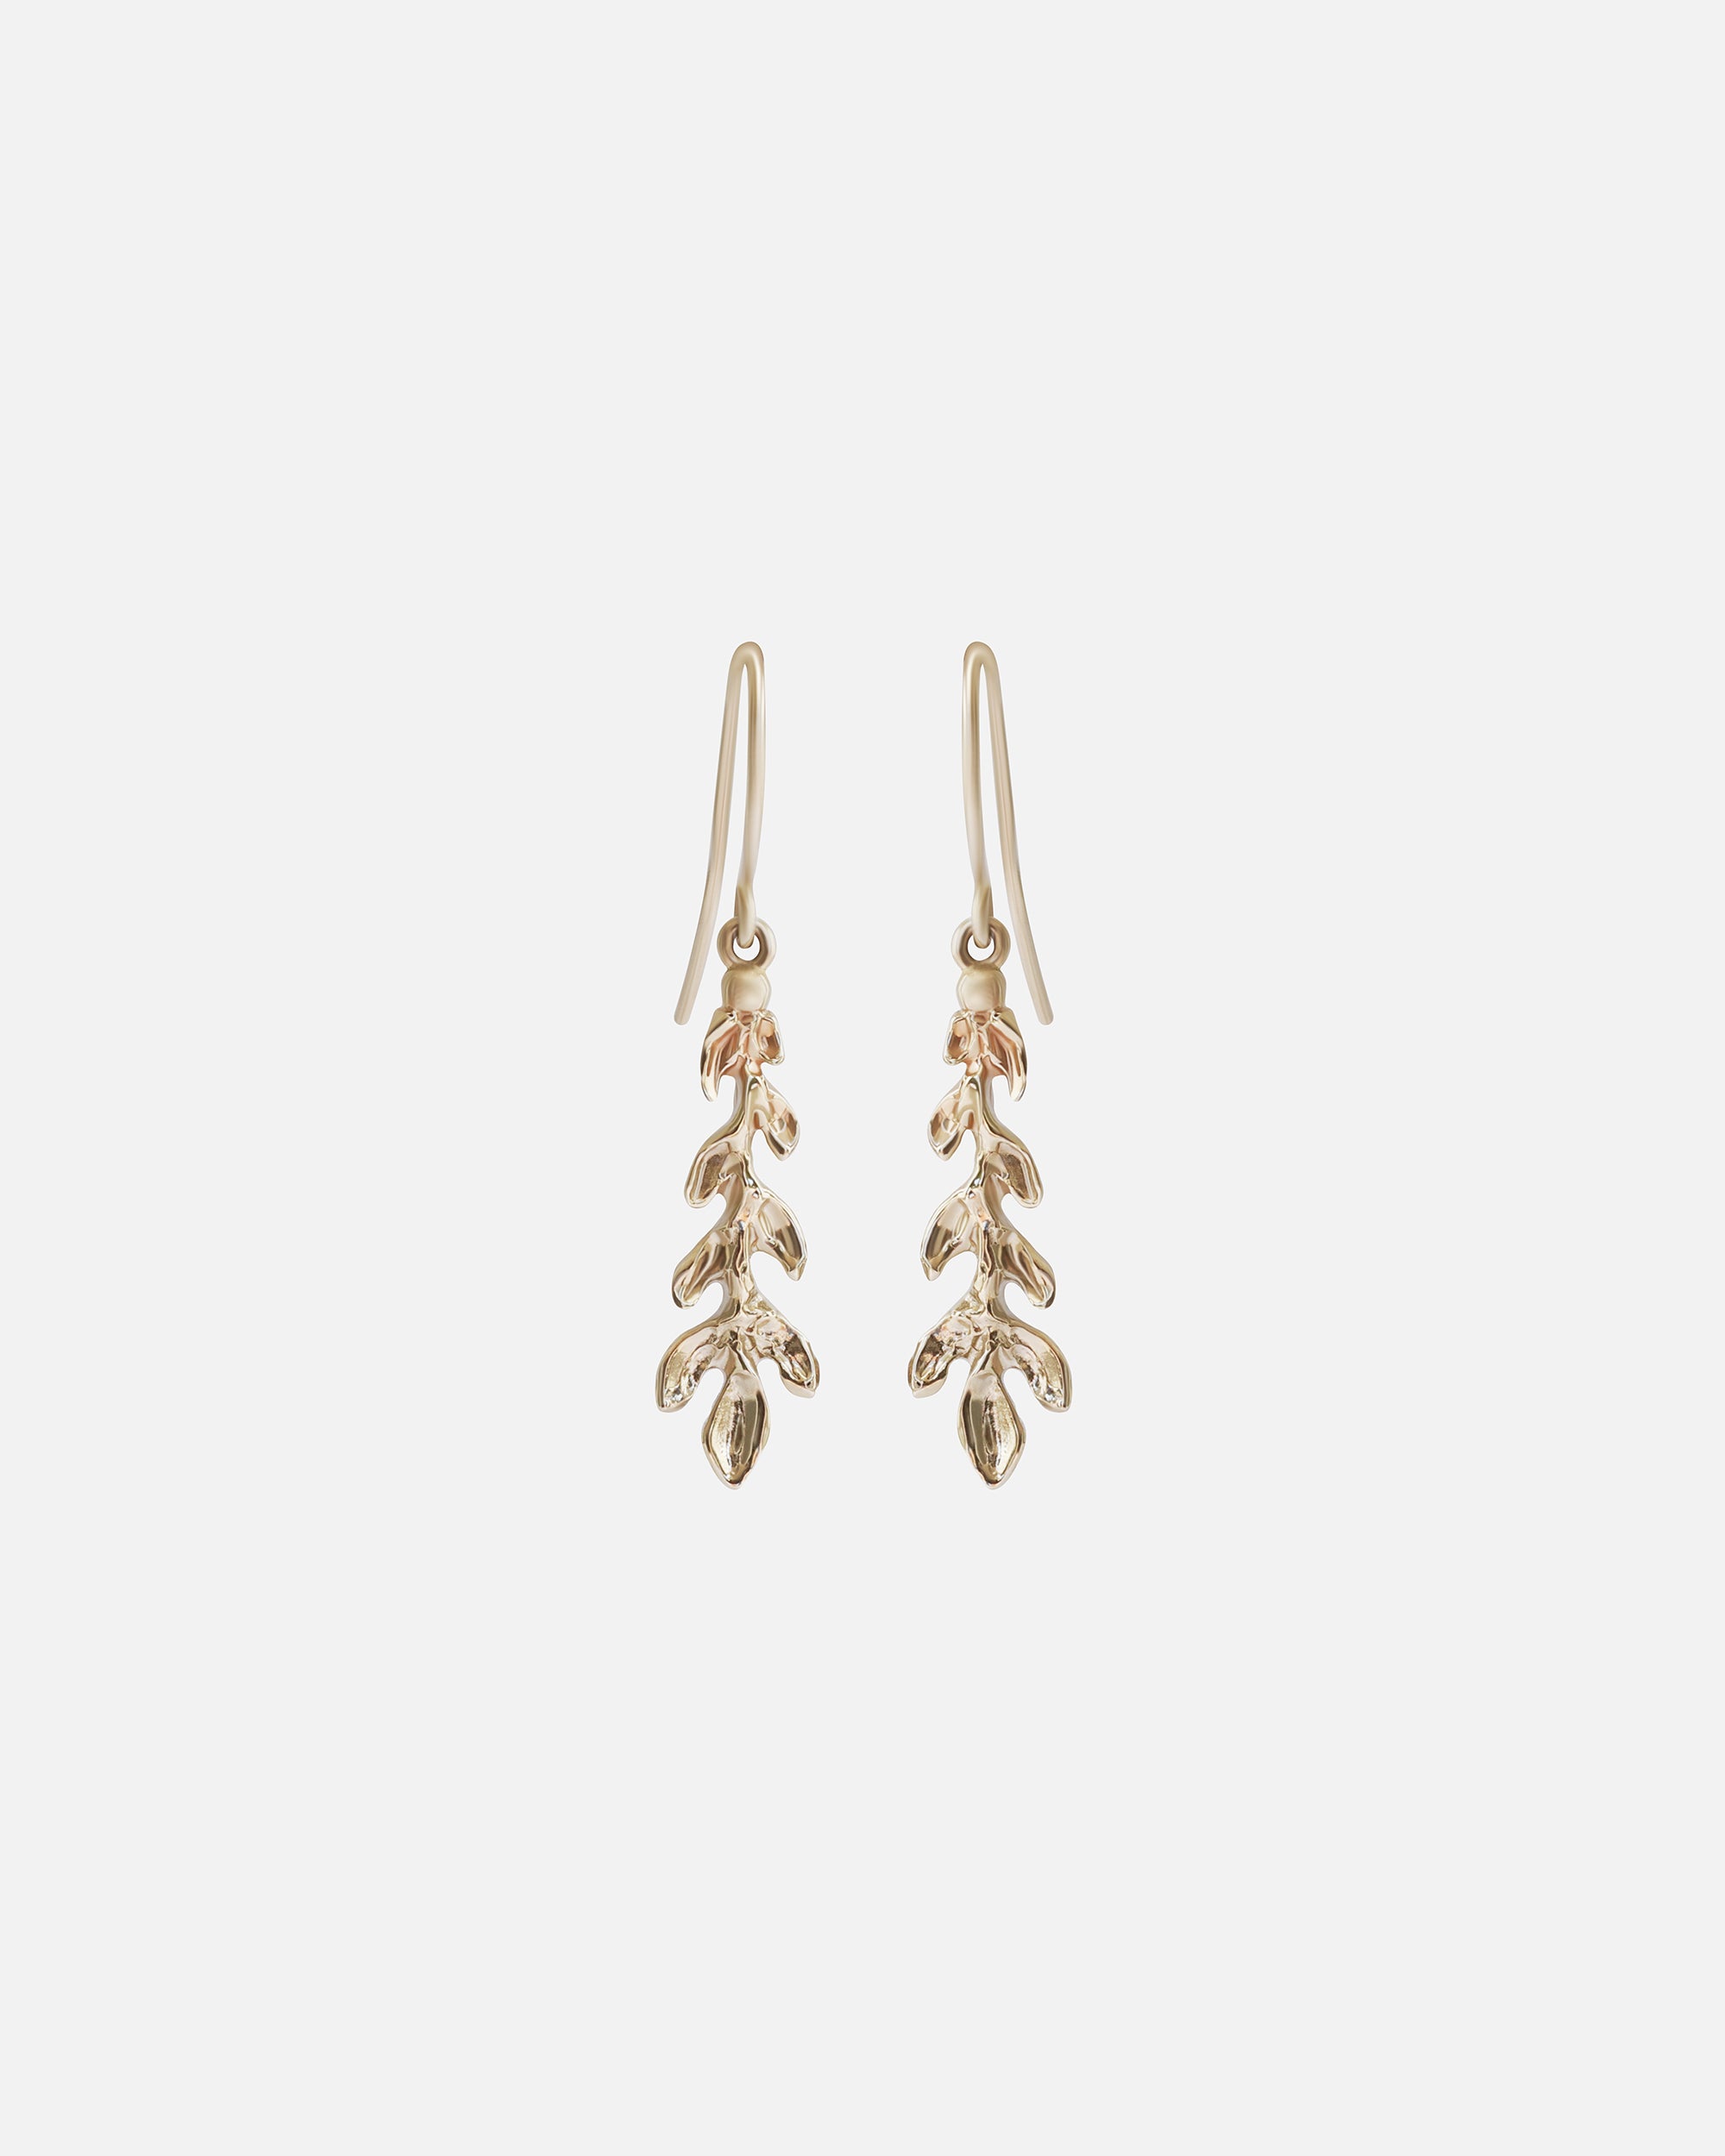 Inverted Branch / Earrings By O Channell Designs